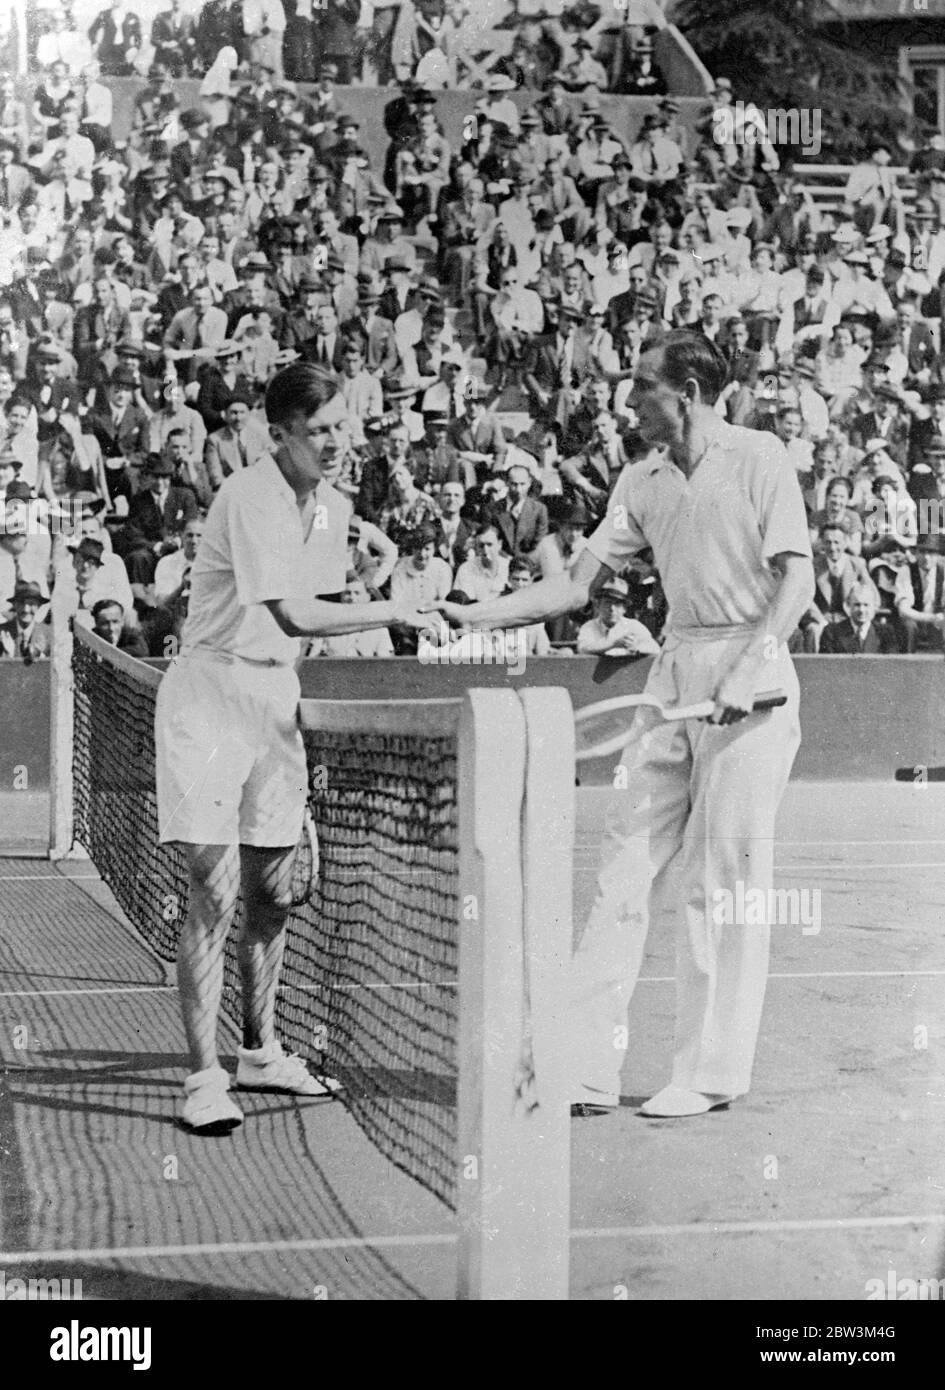 Perry and Austin , leading British players , defeated in Paris tournament . Fred Perry and H W Austin , Britain ' s leading tennis playes , were both defeated in the tournament between the International Clubs of Great Britain and France at the Stade Roland Garros in Paris . Perry was defeated by Christian Boussus , the French champion , 6 - 4 , 6 - 8 , 6 - 2 and Austin fell before Bernard Destremeau in two sets 8 - 6 , 6 - 2 . Photo shows , Perry ( right ) congratulating Boussus after their match . 17 May 1936 Stock Photo